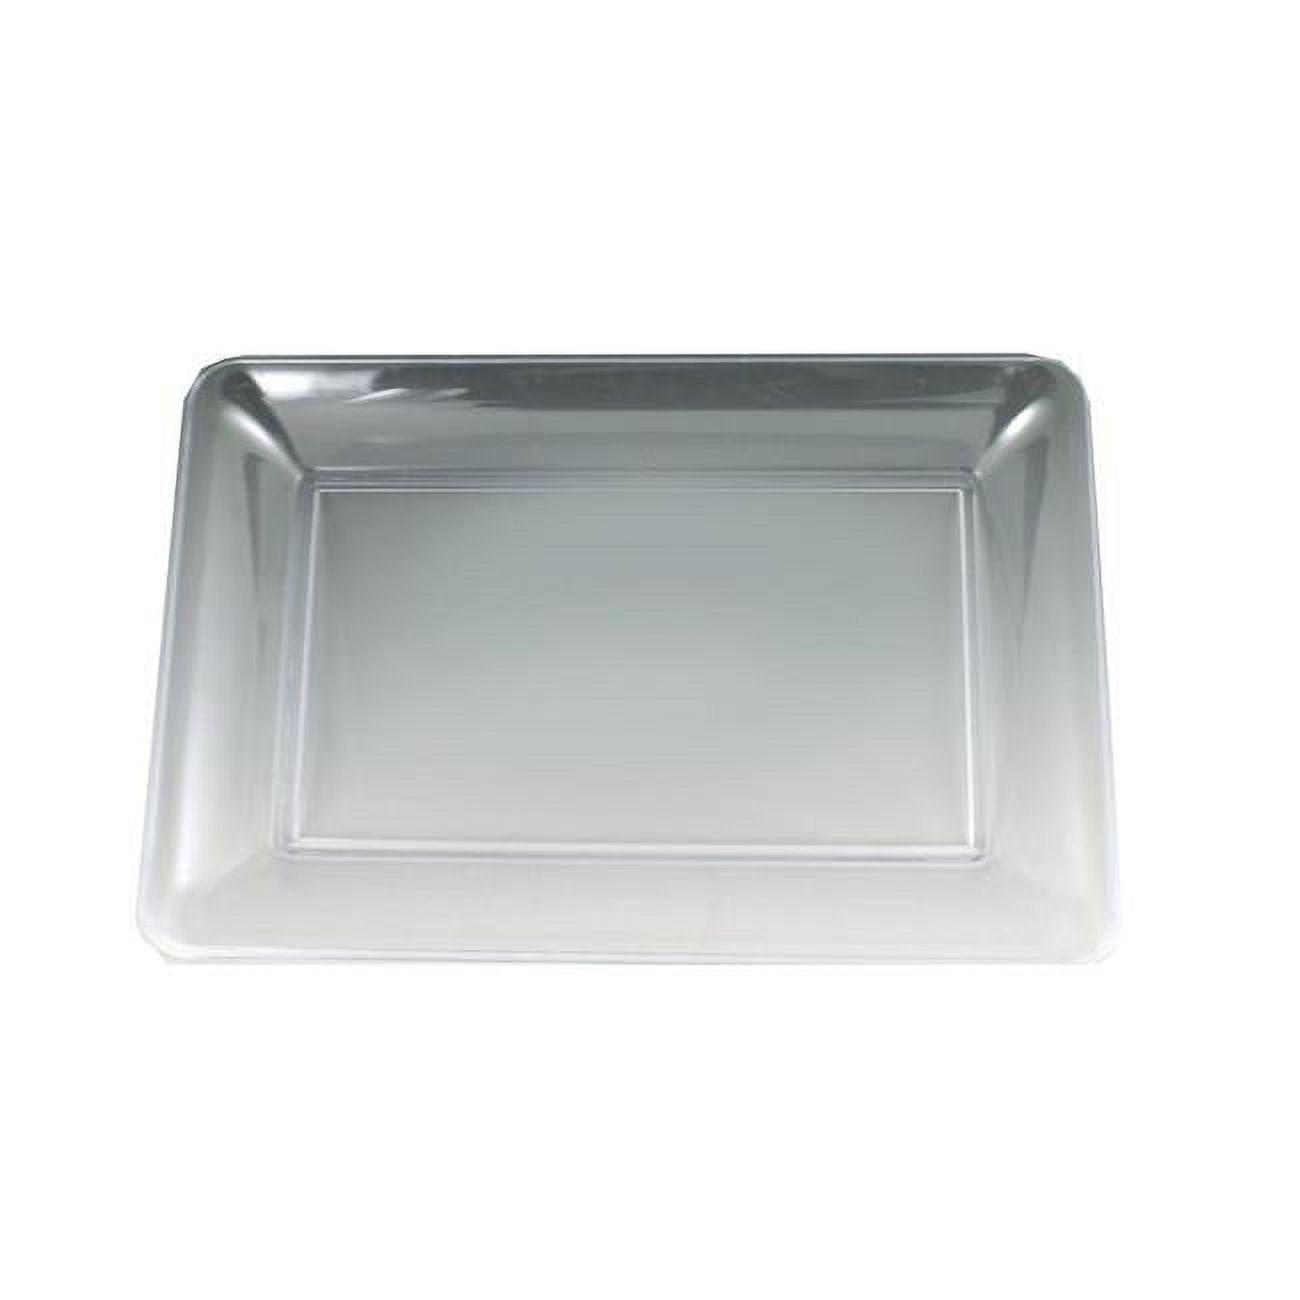 Mpi10146c Pe 10 X 14 In. Clear Sovereign Rectangular Tray - Case Of 25